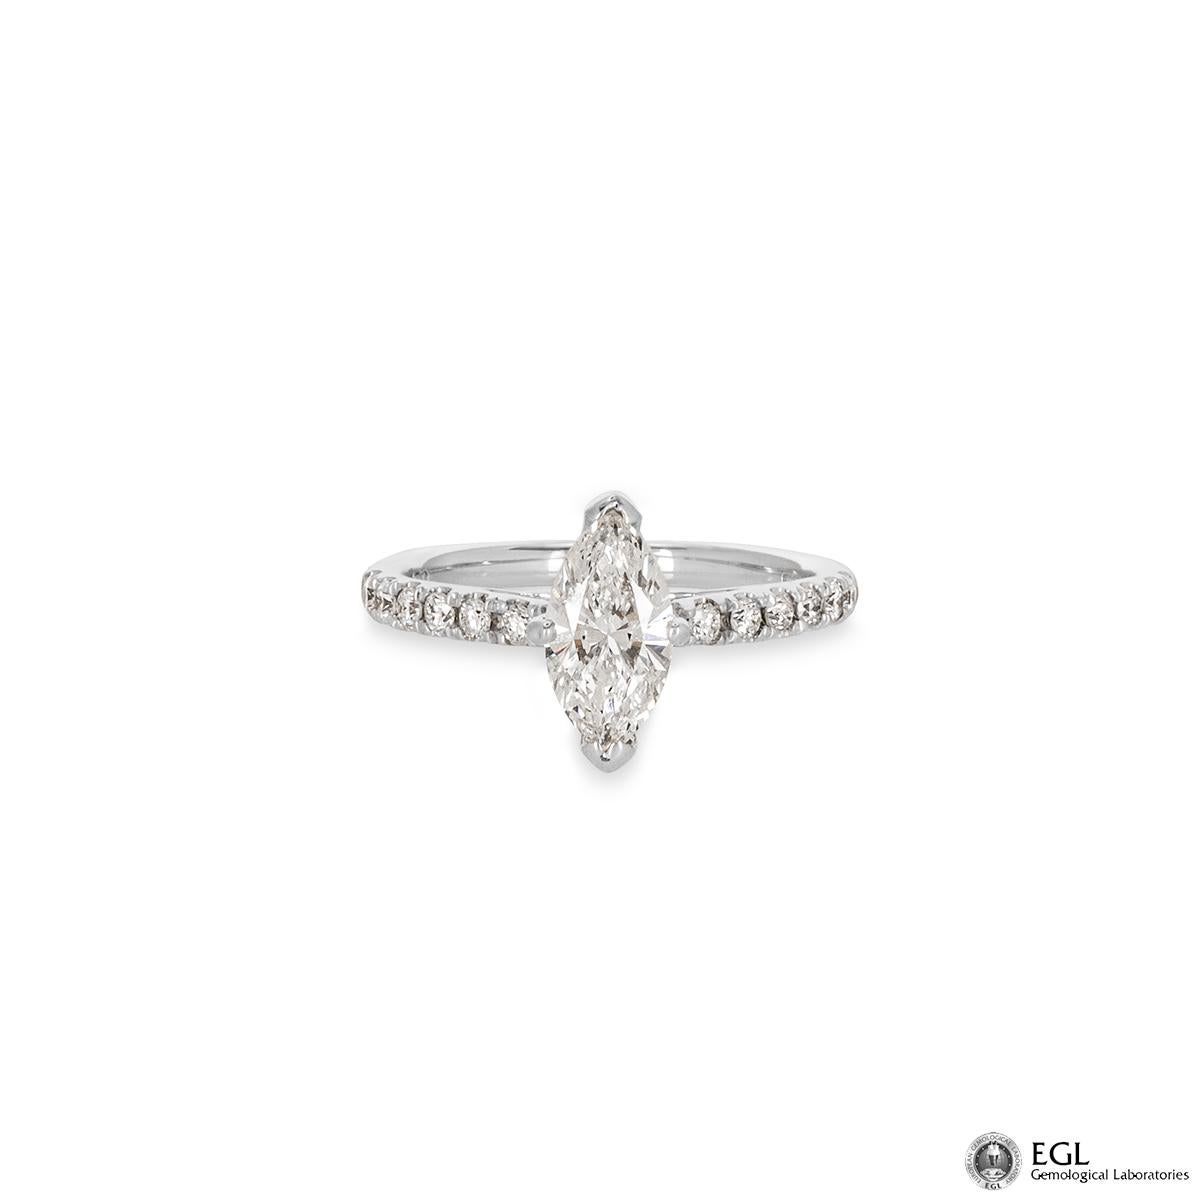 chopard engagement ring price